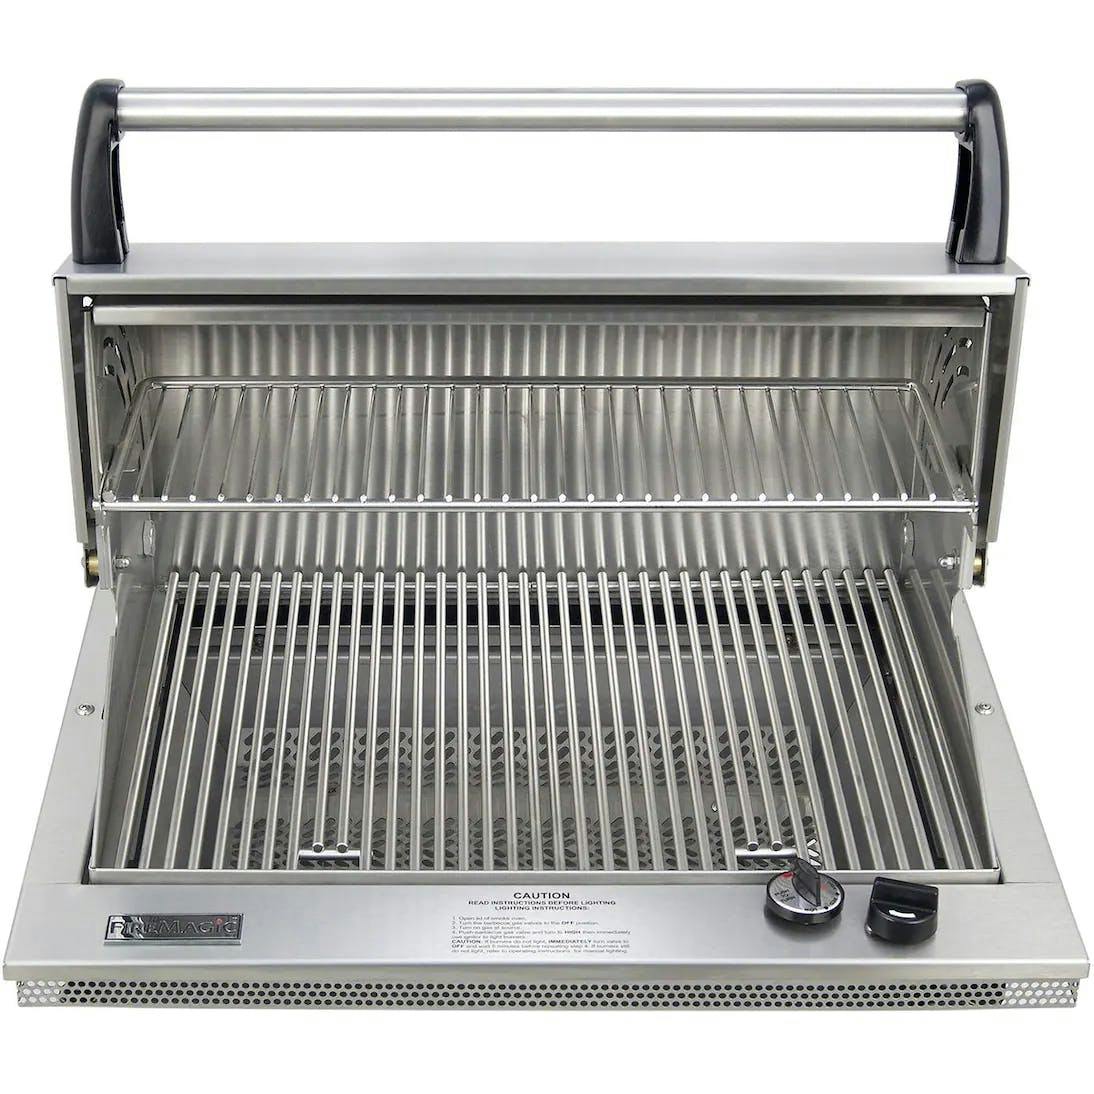 Fire Magic Legacy Deluxe Classic Built-in Gas Grill